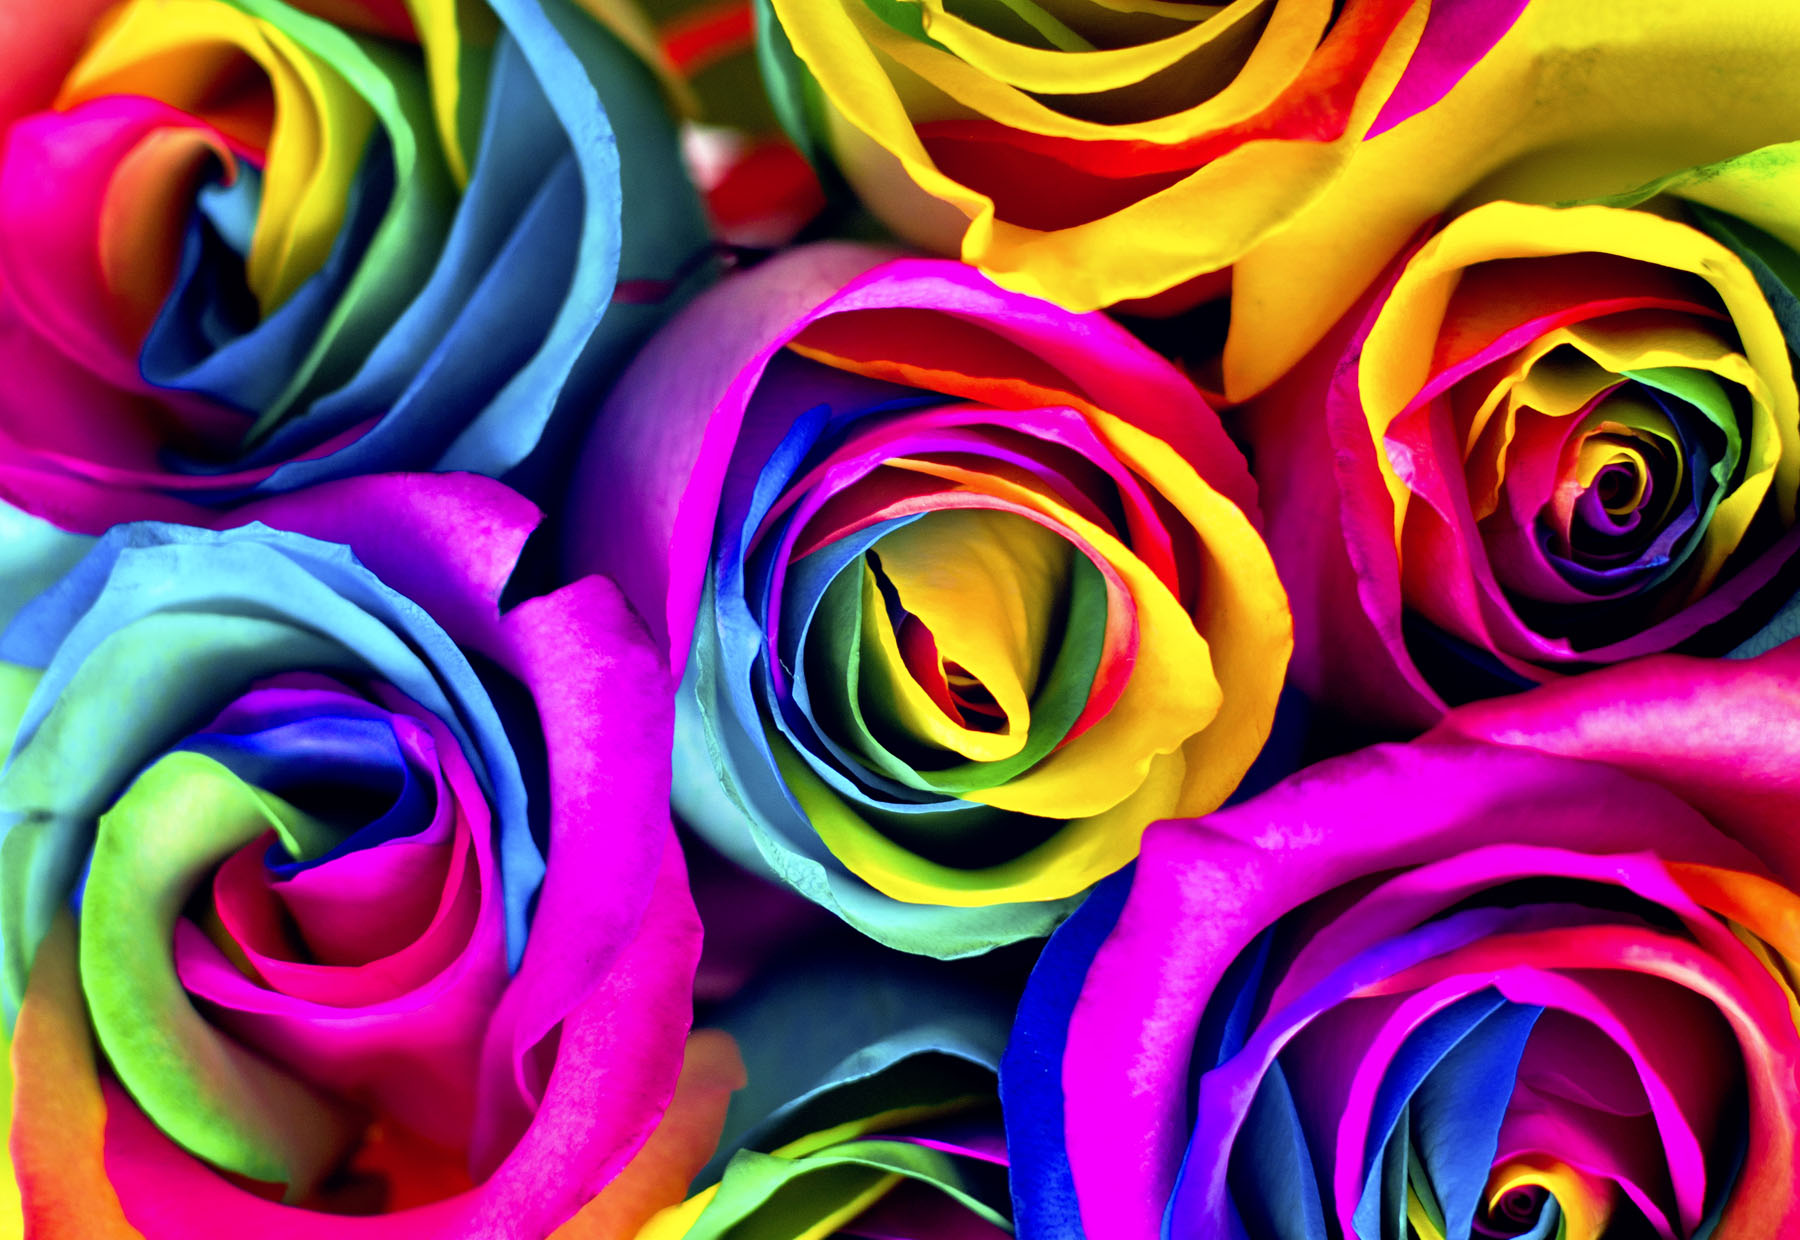 Flowers To Dye For How To Make Rainbow Roses